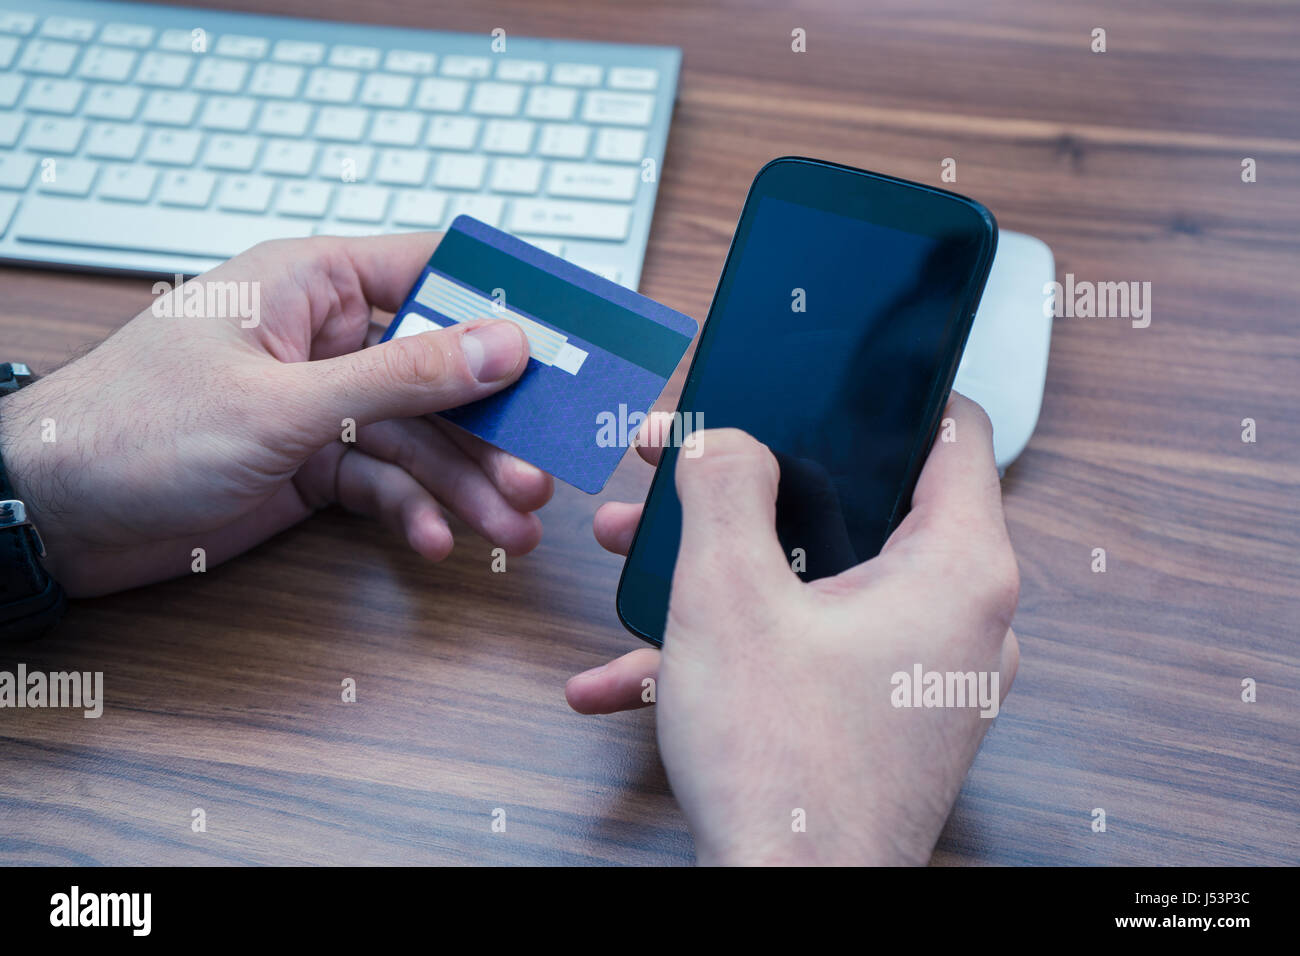 hands holding credit card and a typing on the phone making online purchase Stock Photo